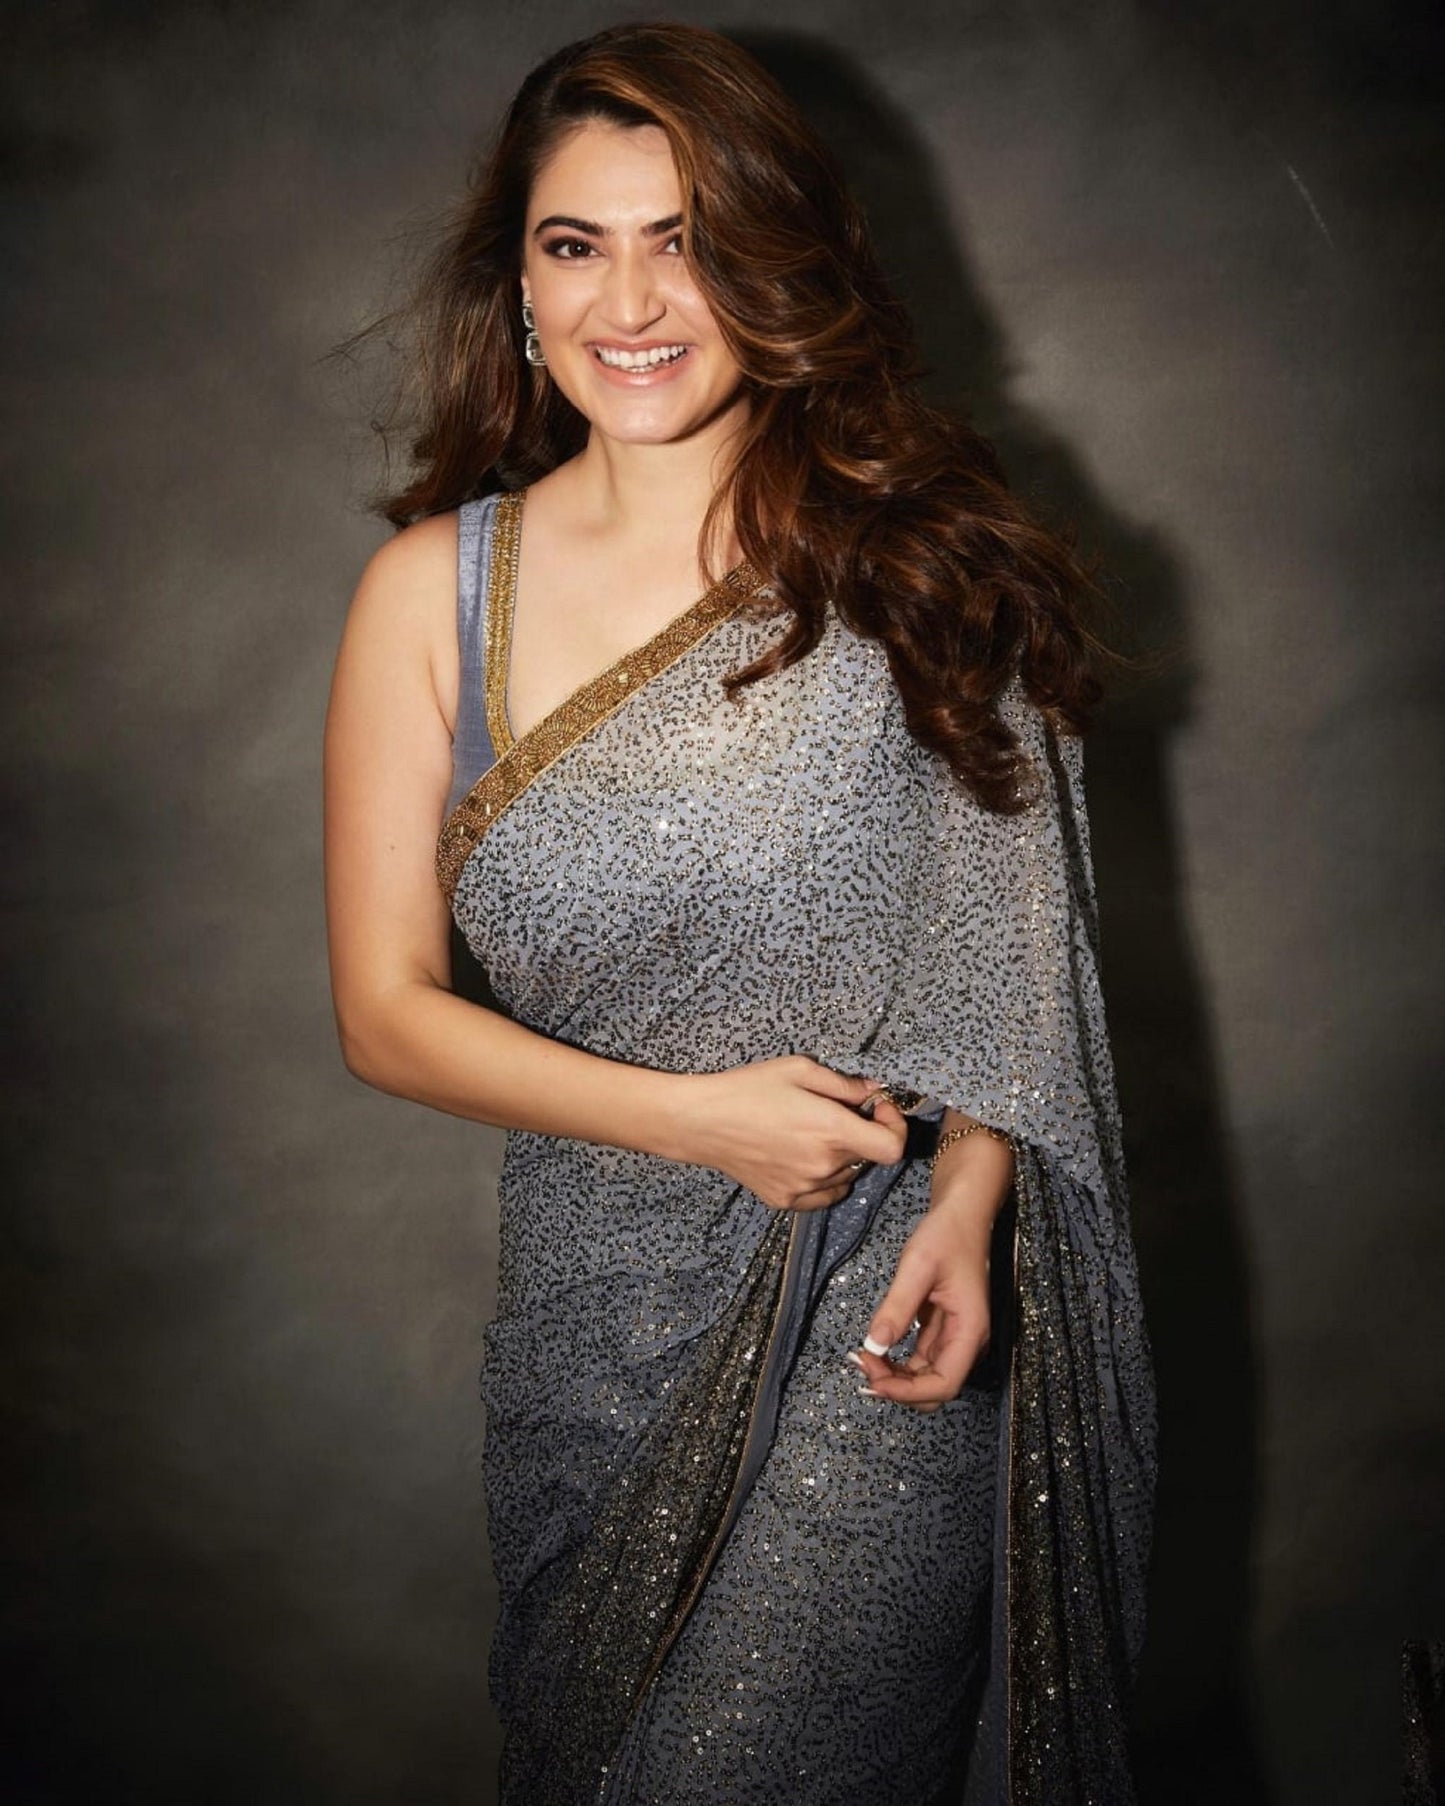 GRAY Color georgette With Sequence Embroidery Work Designer Saree Beautiful And Stunning Look Saree Sabyasachi Style Party Wear Saree